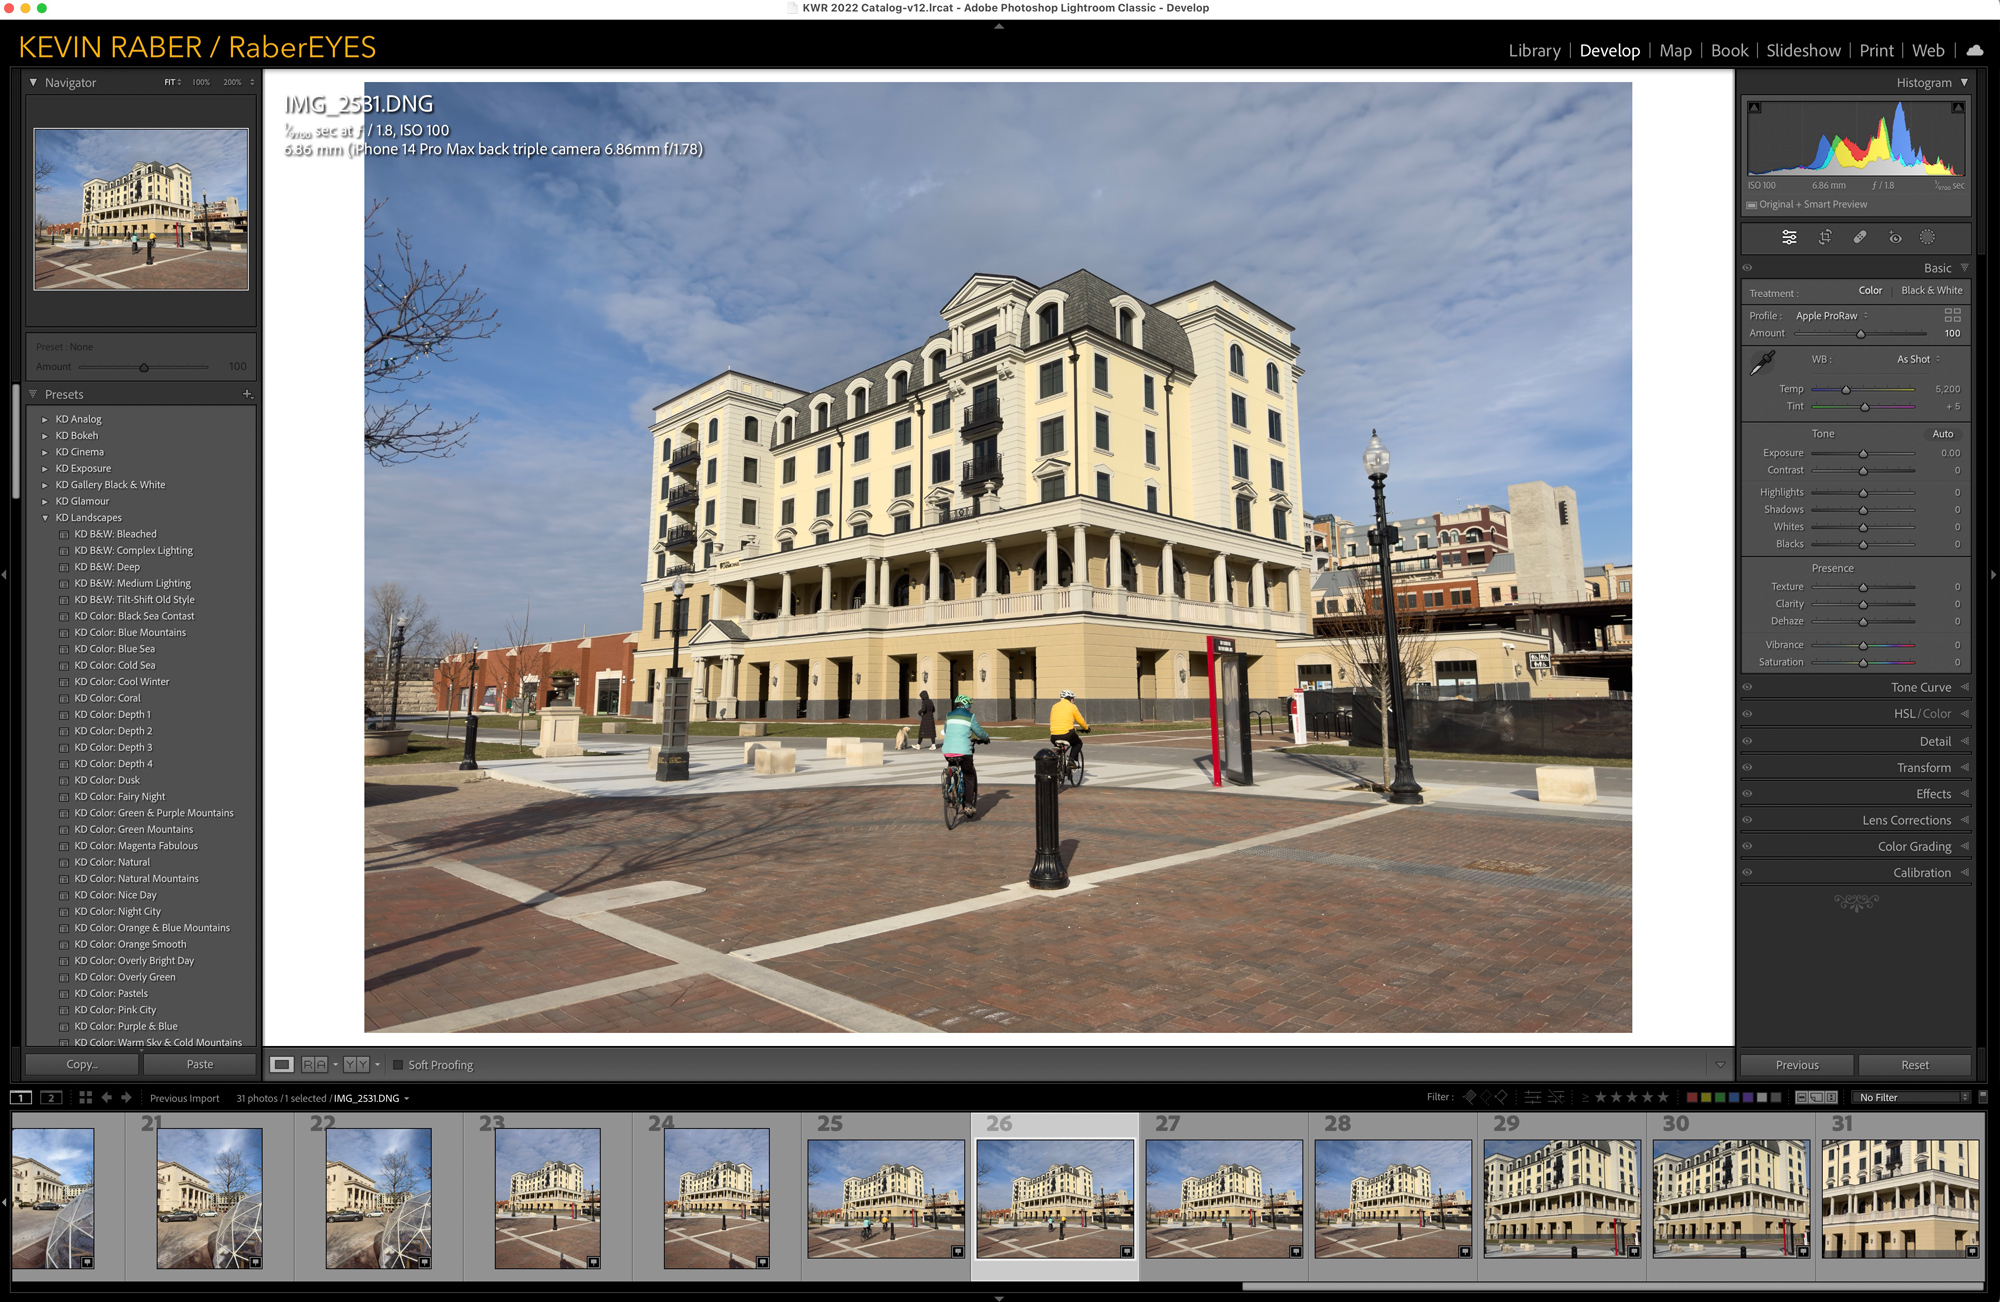 The images in Lightroom prior to being exported